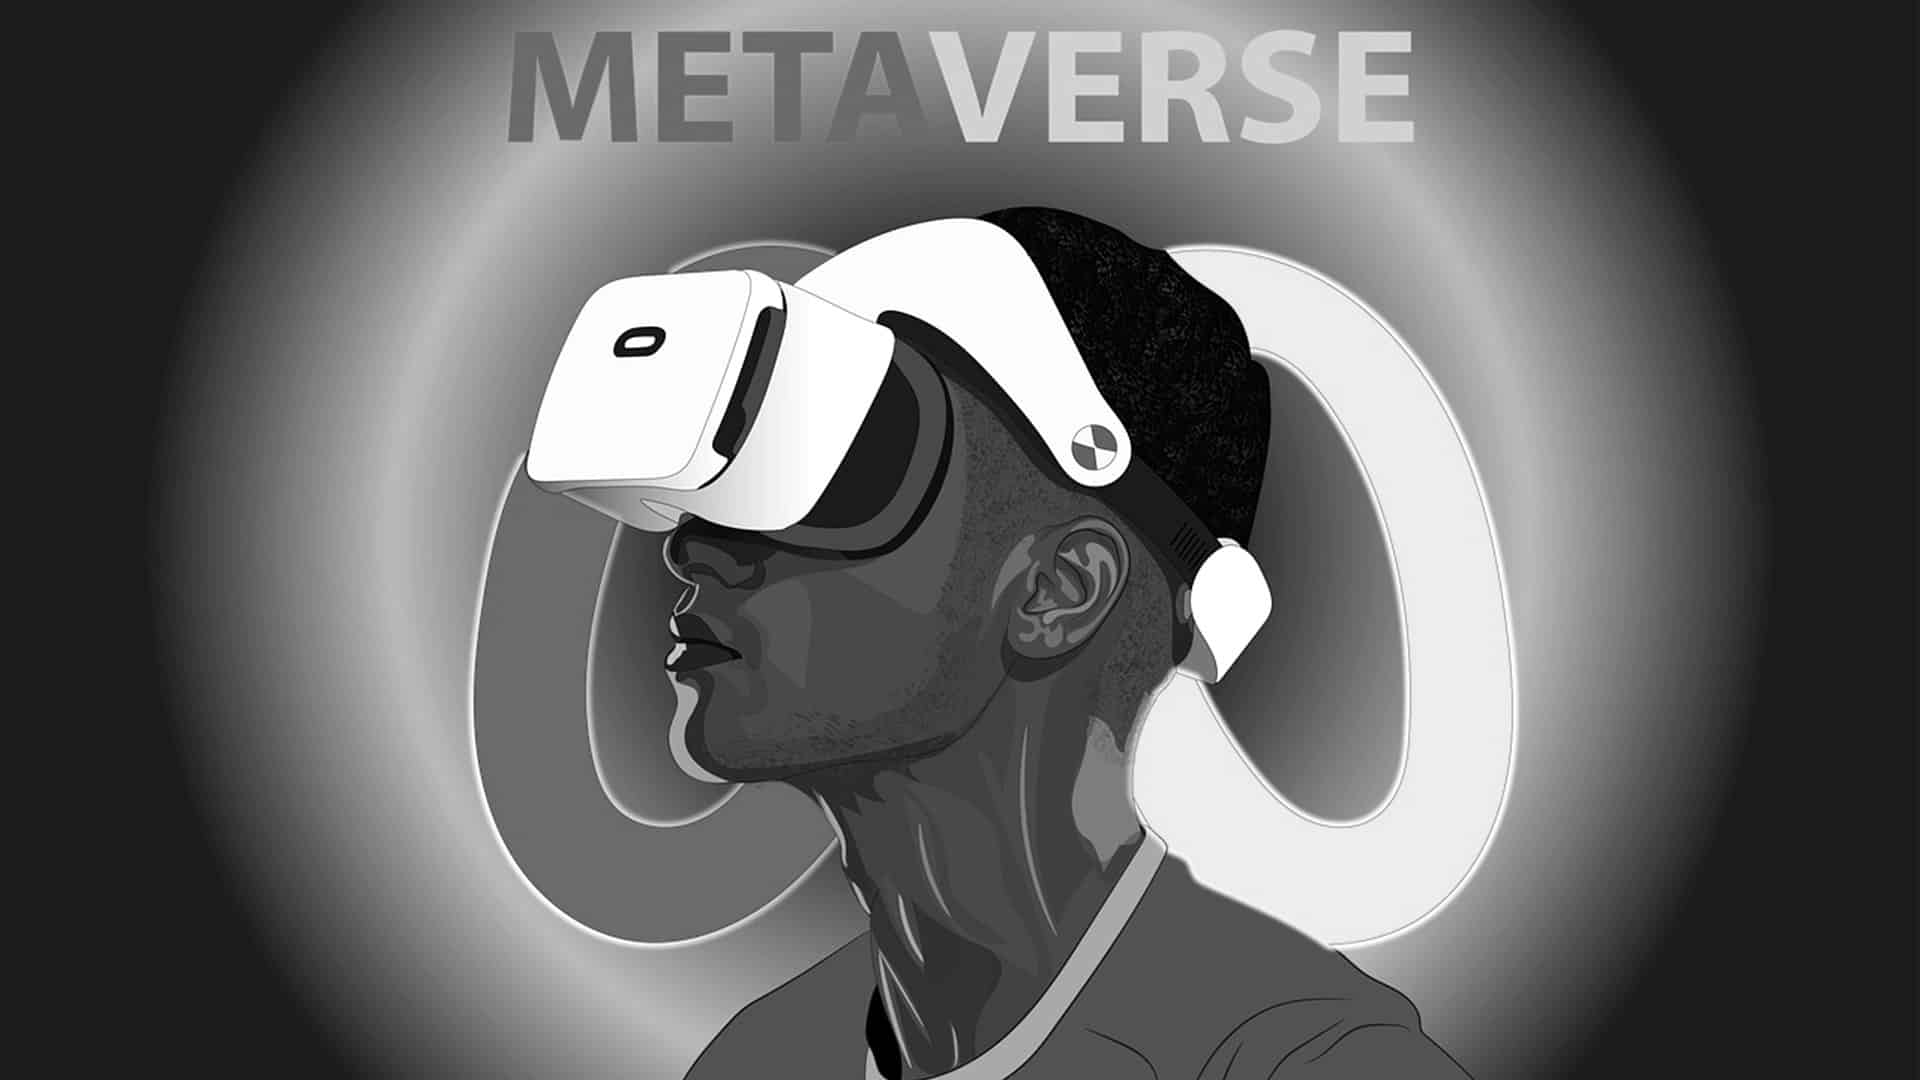 What are the security risks and Privacy Challenges in the Metaverse?